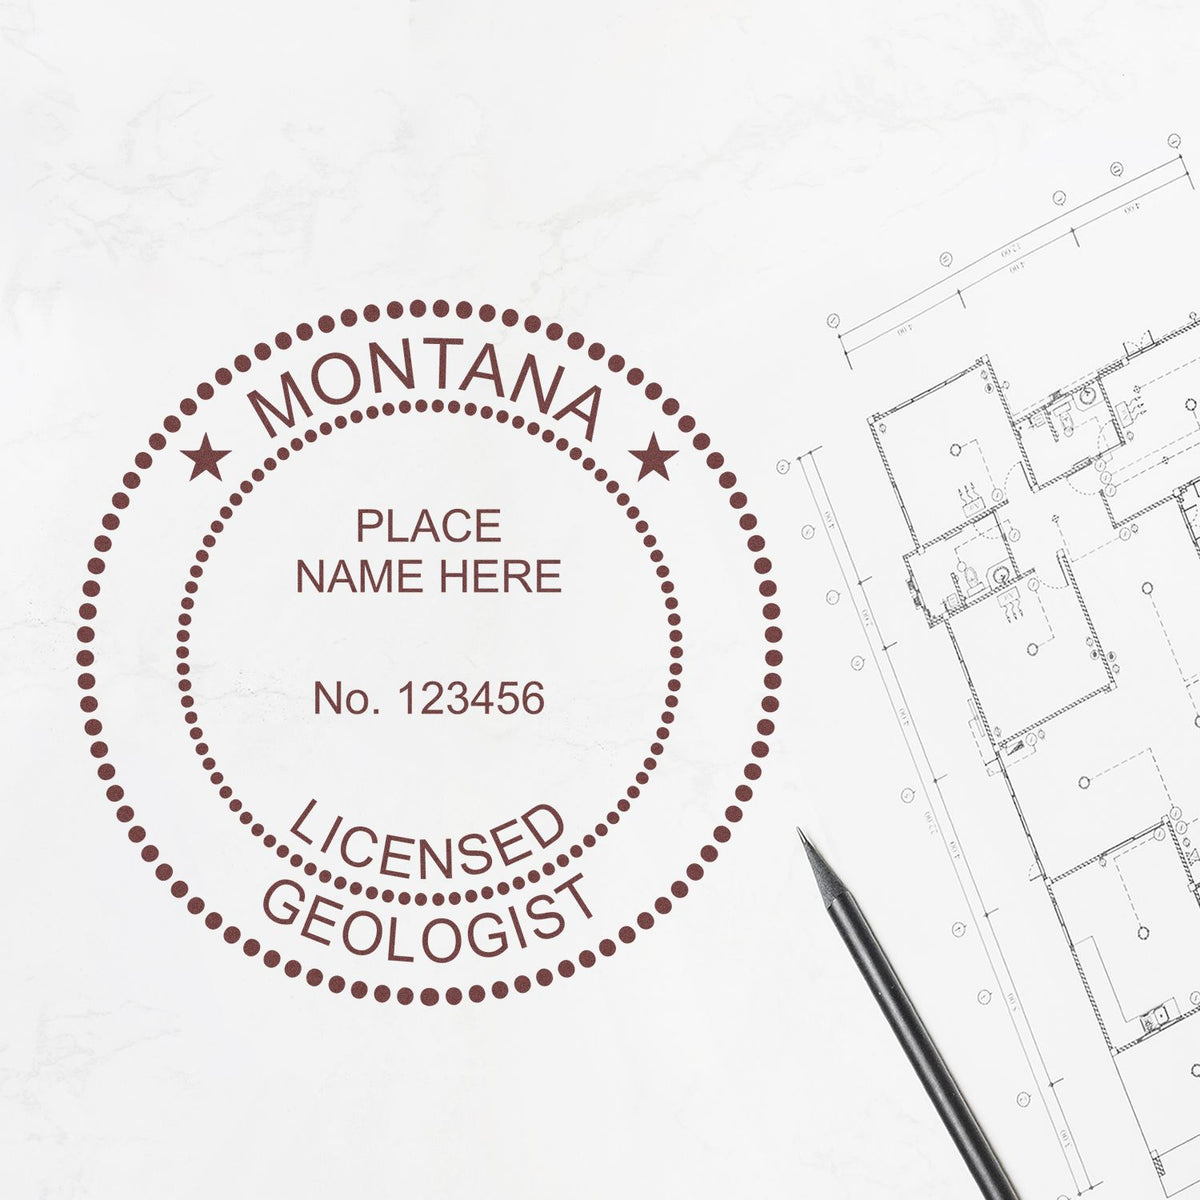 Another Example of a stamped impression of the Slim Pre-Inked Montana Professional Geologist Seal Stamp on a office form